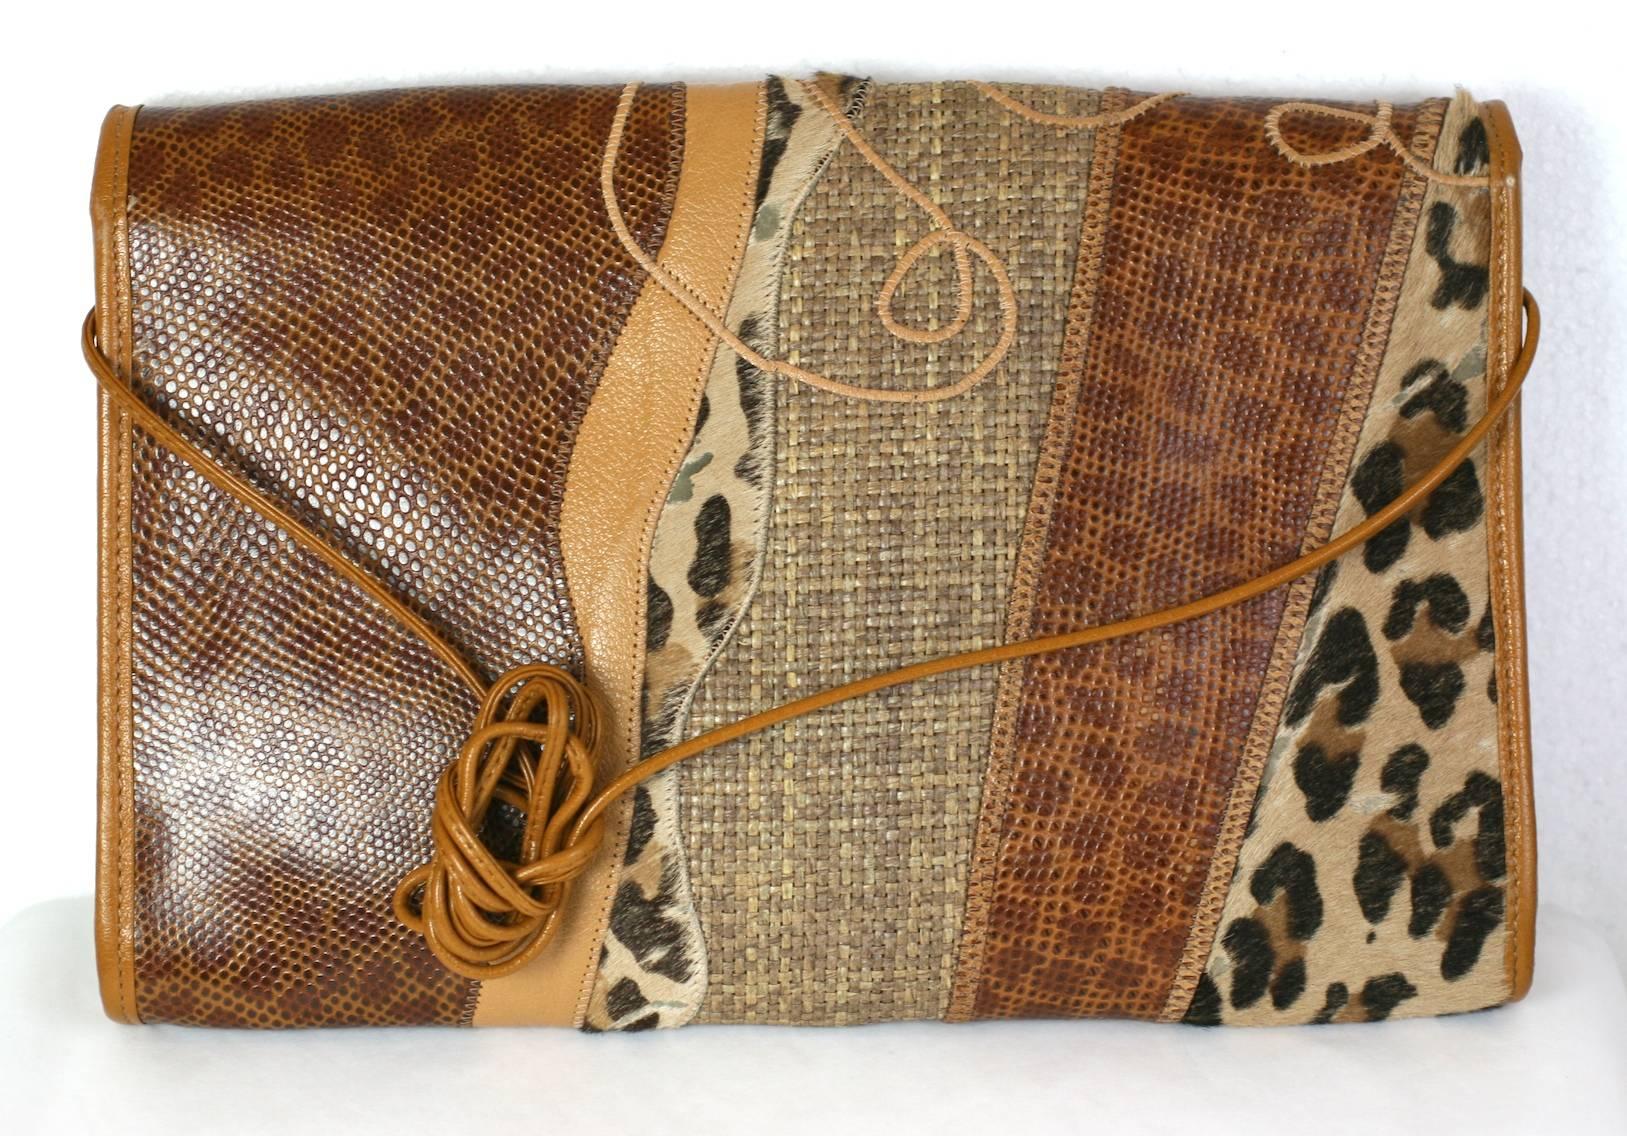 Carlos Falchi Pieced Clutch of snake, leather and faux pony skin printed leopard.
12